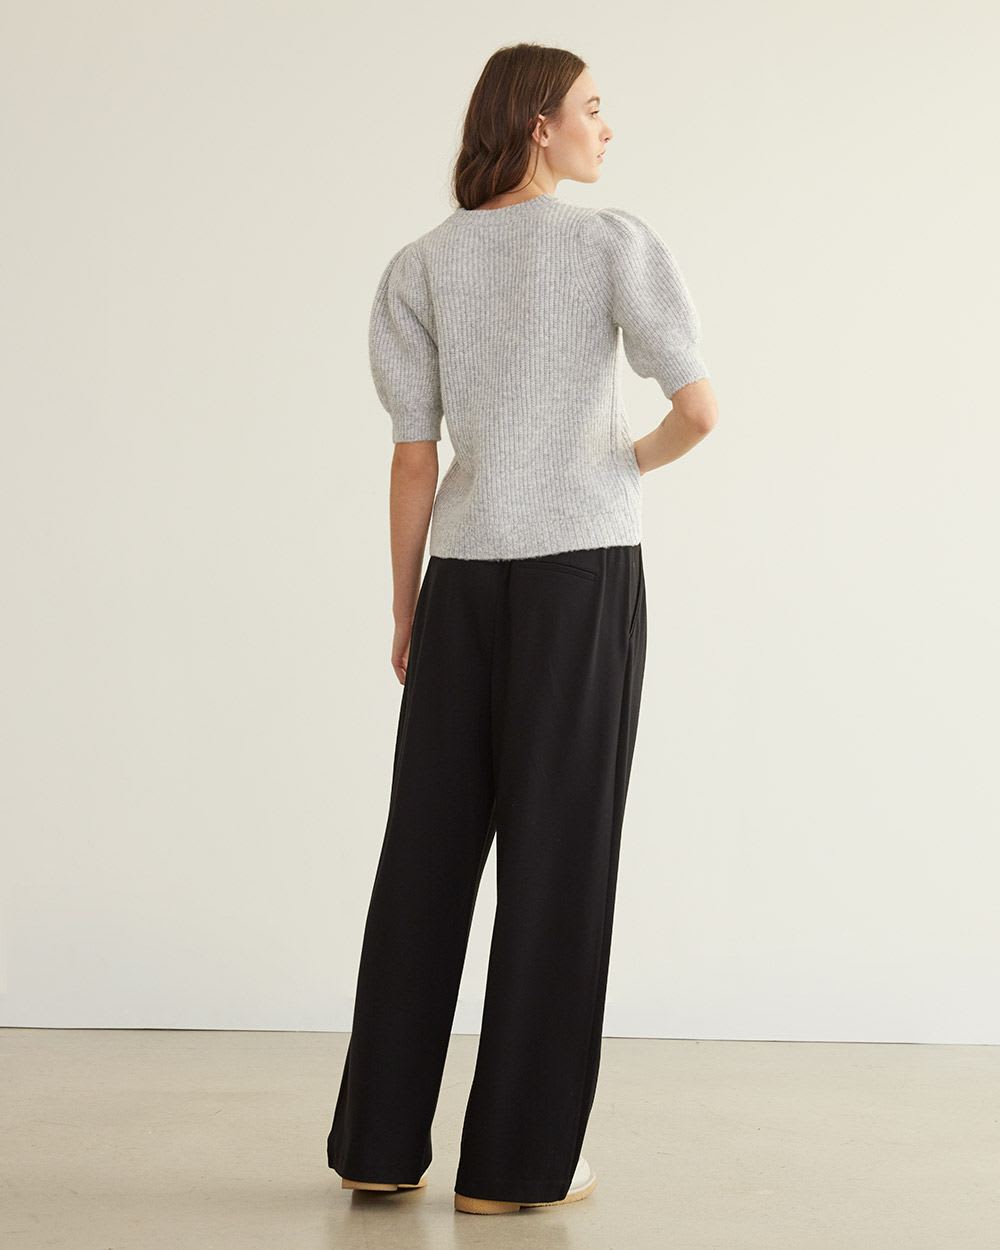 Short-Sleeve Crew-Neck Pullover with Cable Stitches